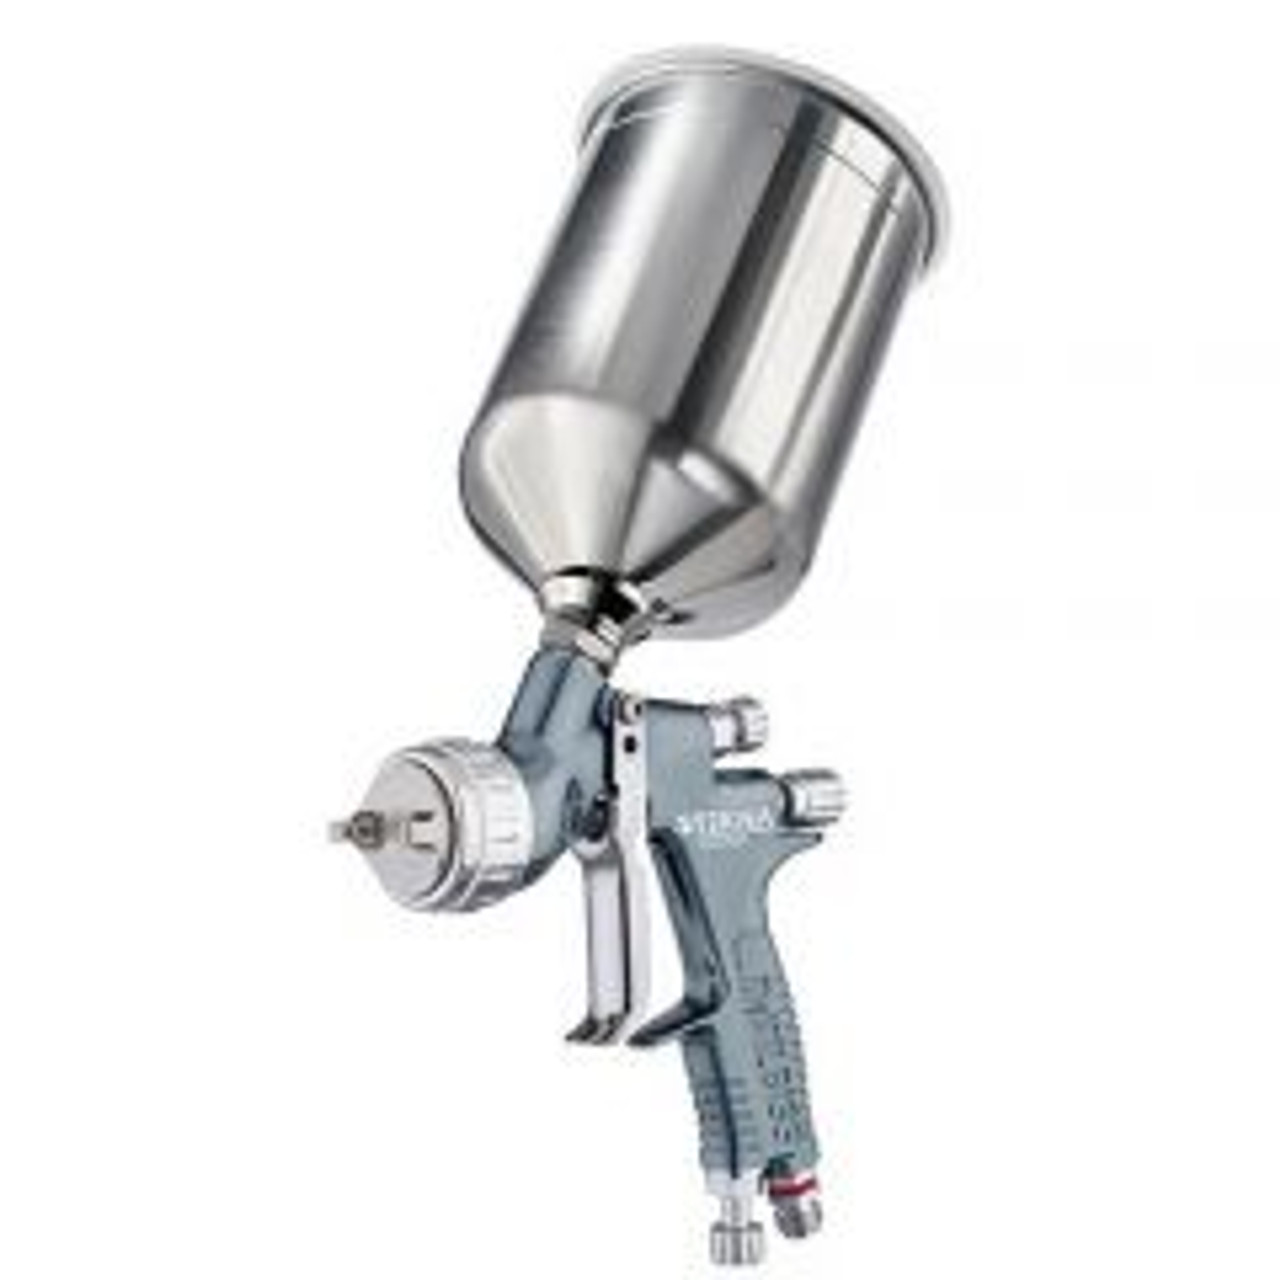 DevilBiss? TEKNA? 704175 Gravity Feed Spray Gun with Cup, 1.8